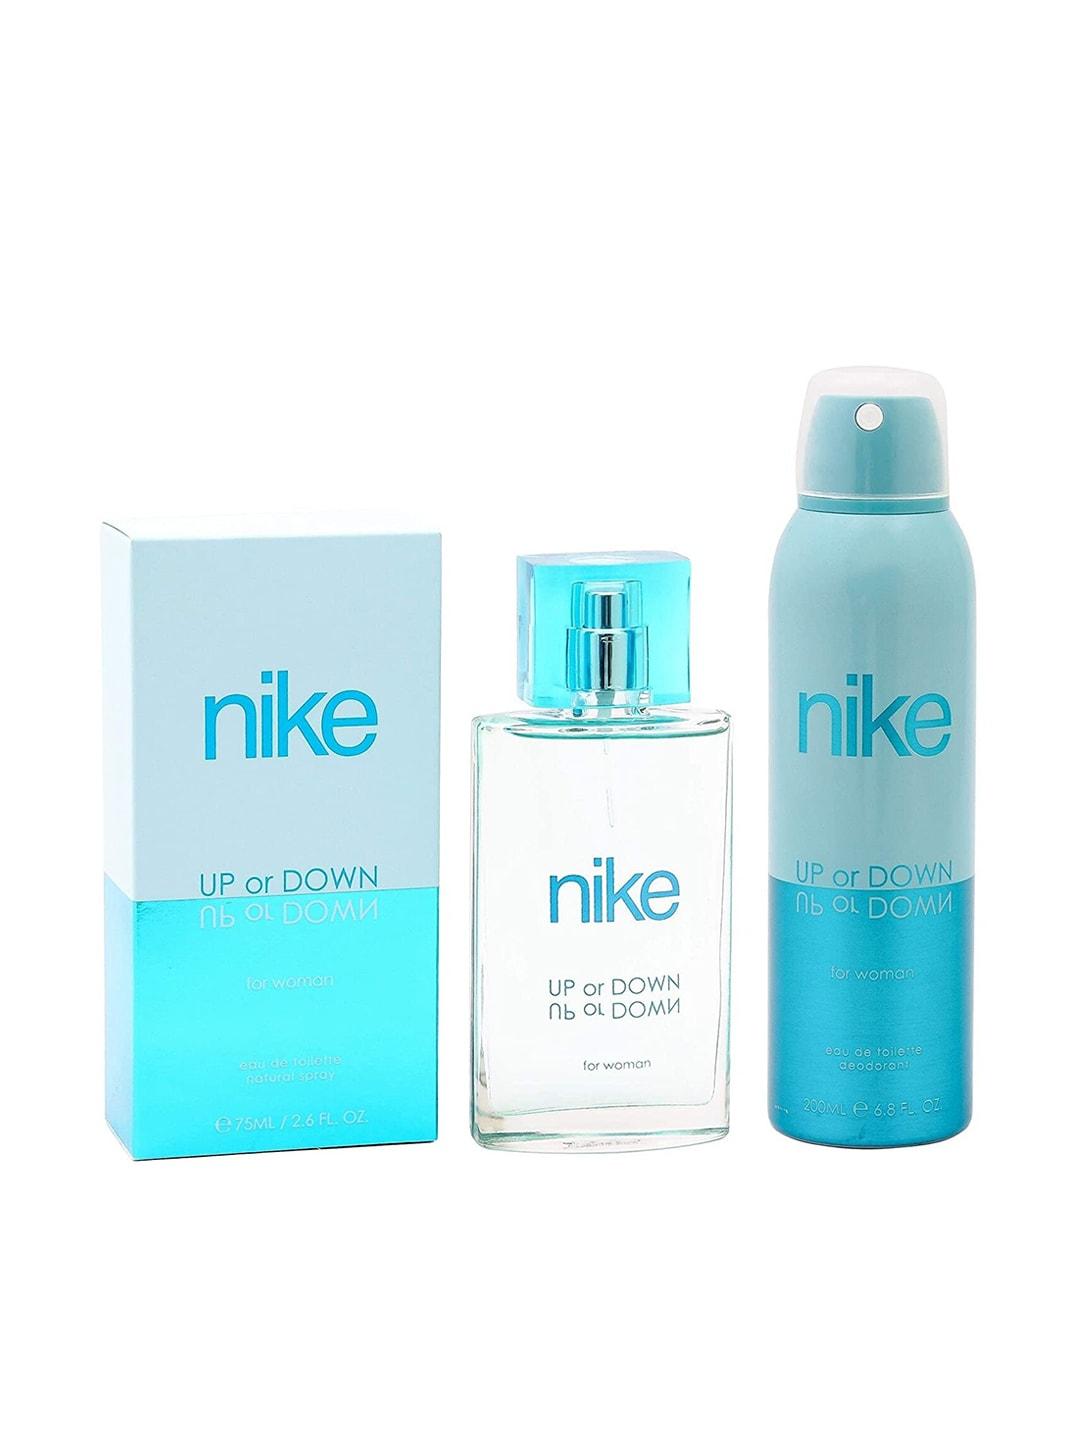 nike woman combo set of up or down edt perfume (75ml) +  deodorant (200ml)